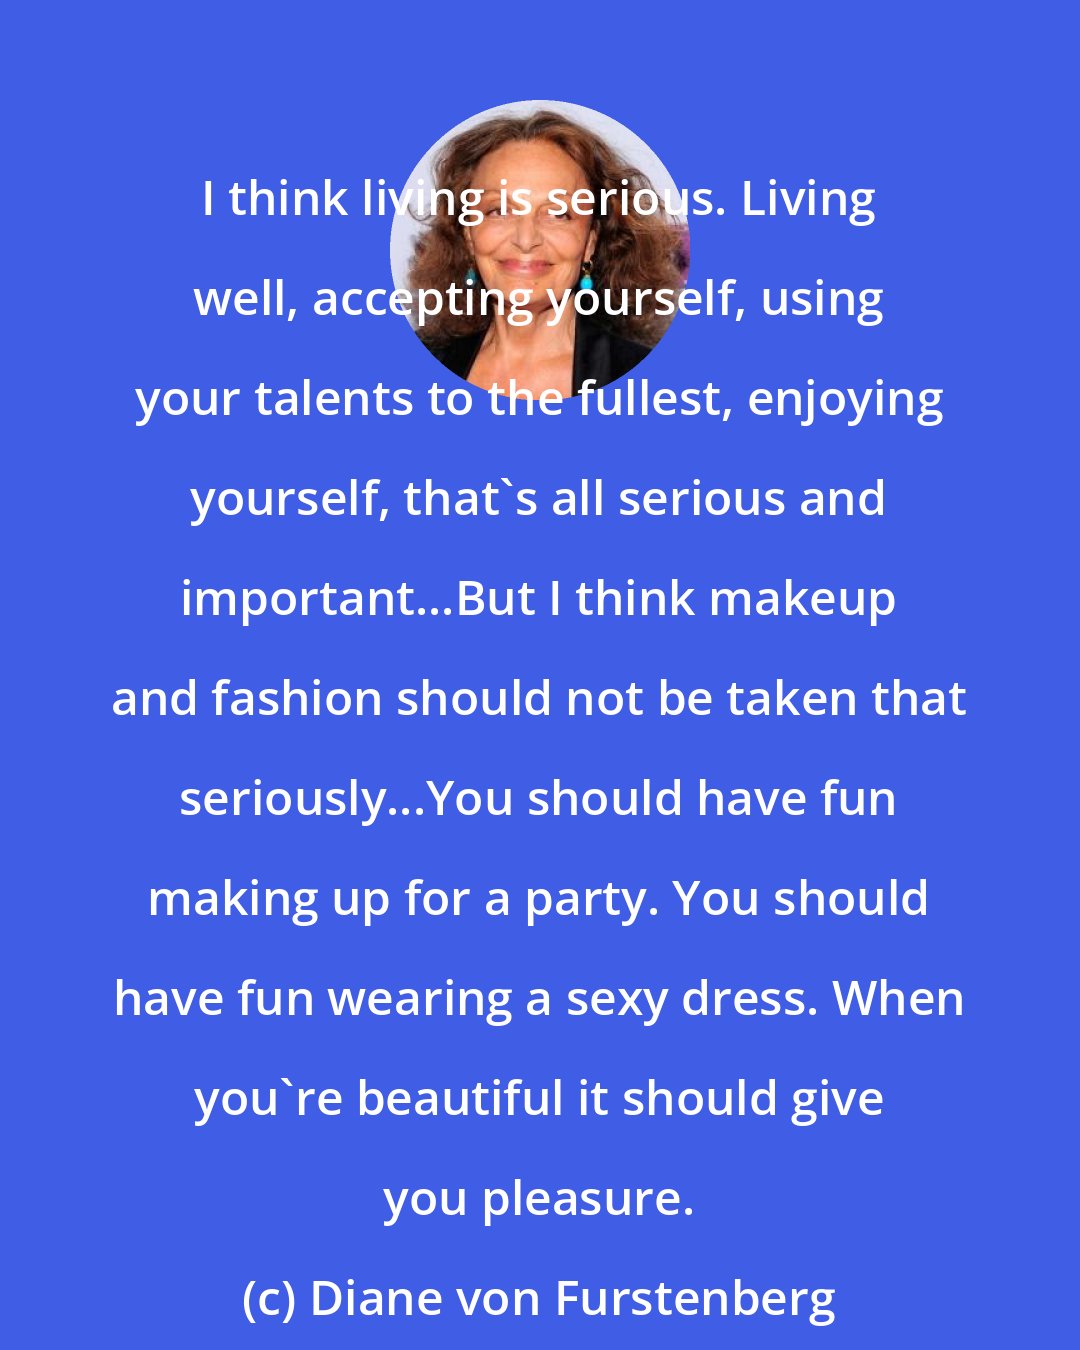 Diane von Furstenberg: I think living is serious. Living well, accepting yourself, using your talents to the fullest, enjoying yourself, that's all serious and important...But I think makeup and fashion should not be taken that seriously...You should have fun making up for a party. You should have fun wearing a sexy dress. When you're beautiful it should give you pleasure.